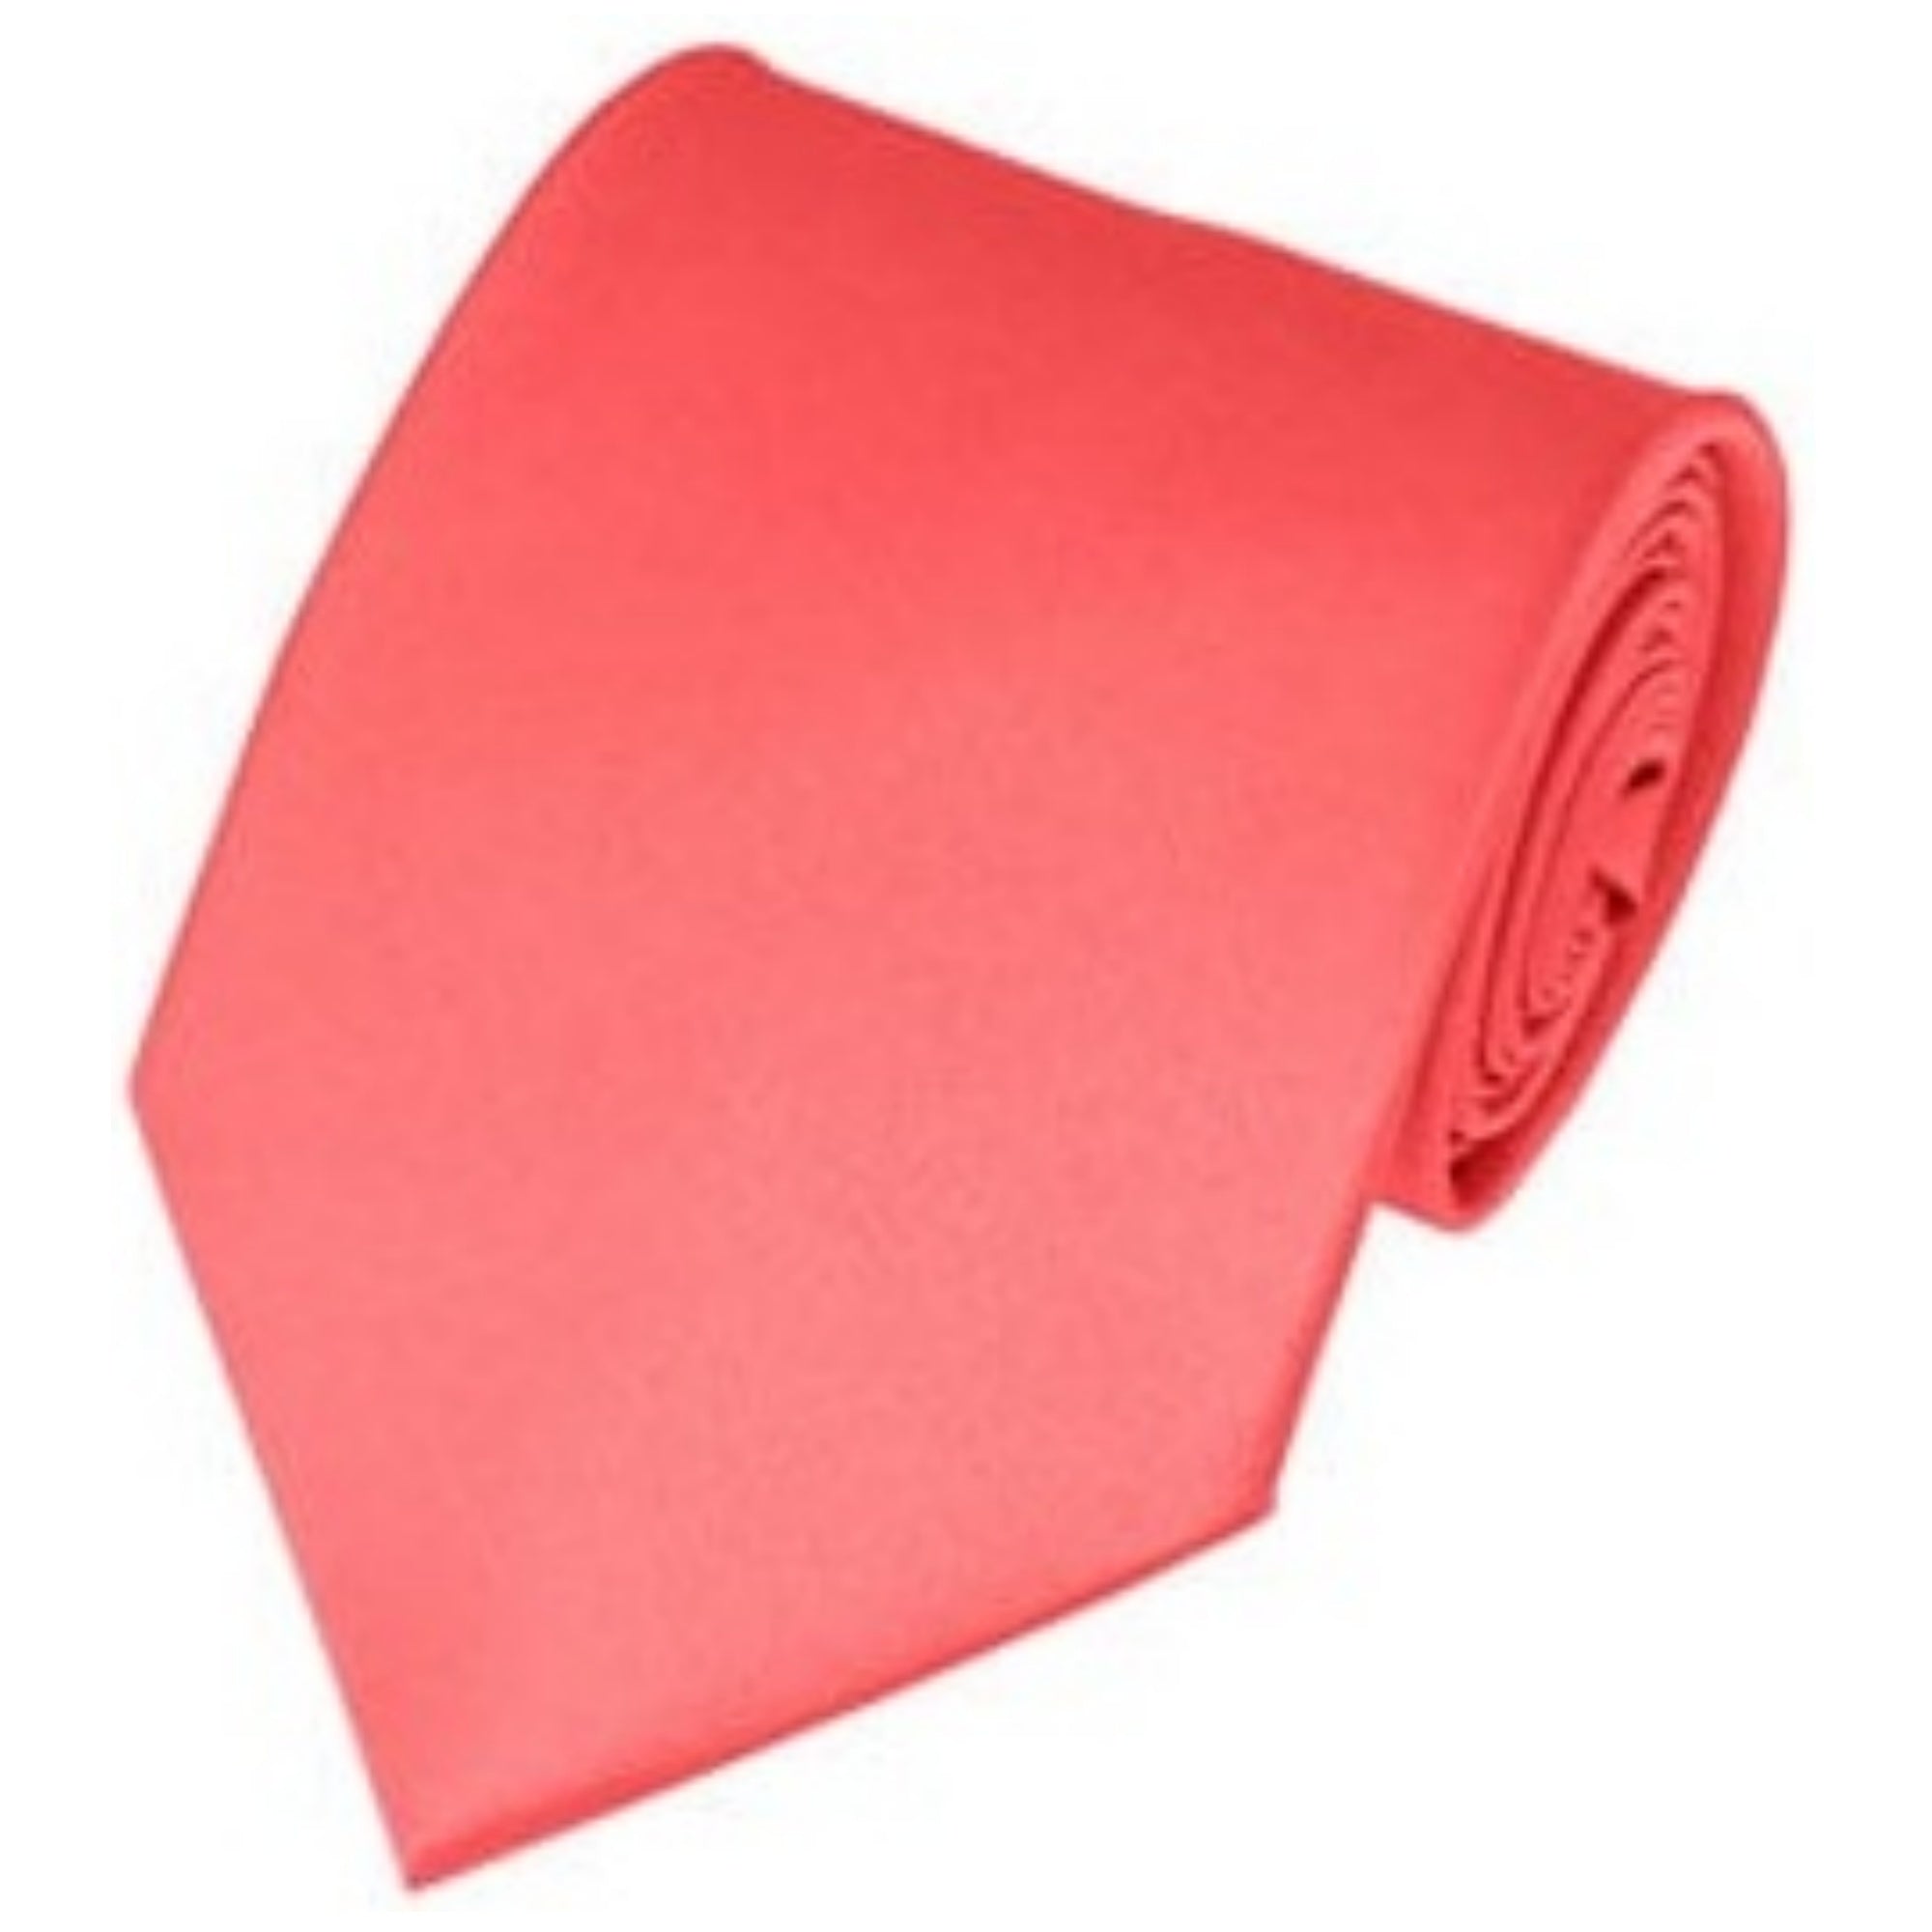 TheDapperTie Solid Color 3.5 Inch Wide And 62 Inch Extra Long Necktie For Big & Tall Men Neck Tie TheDapperTie Coral Rose  